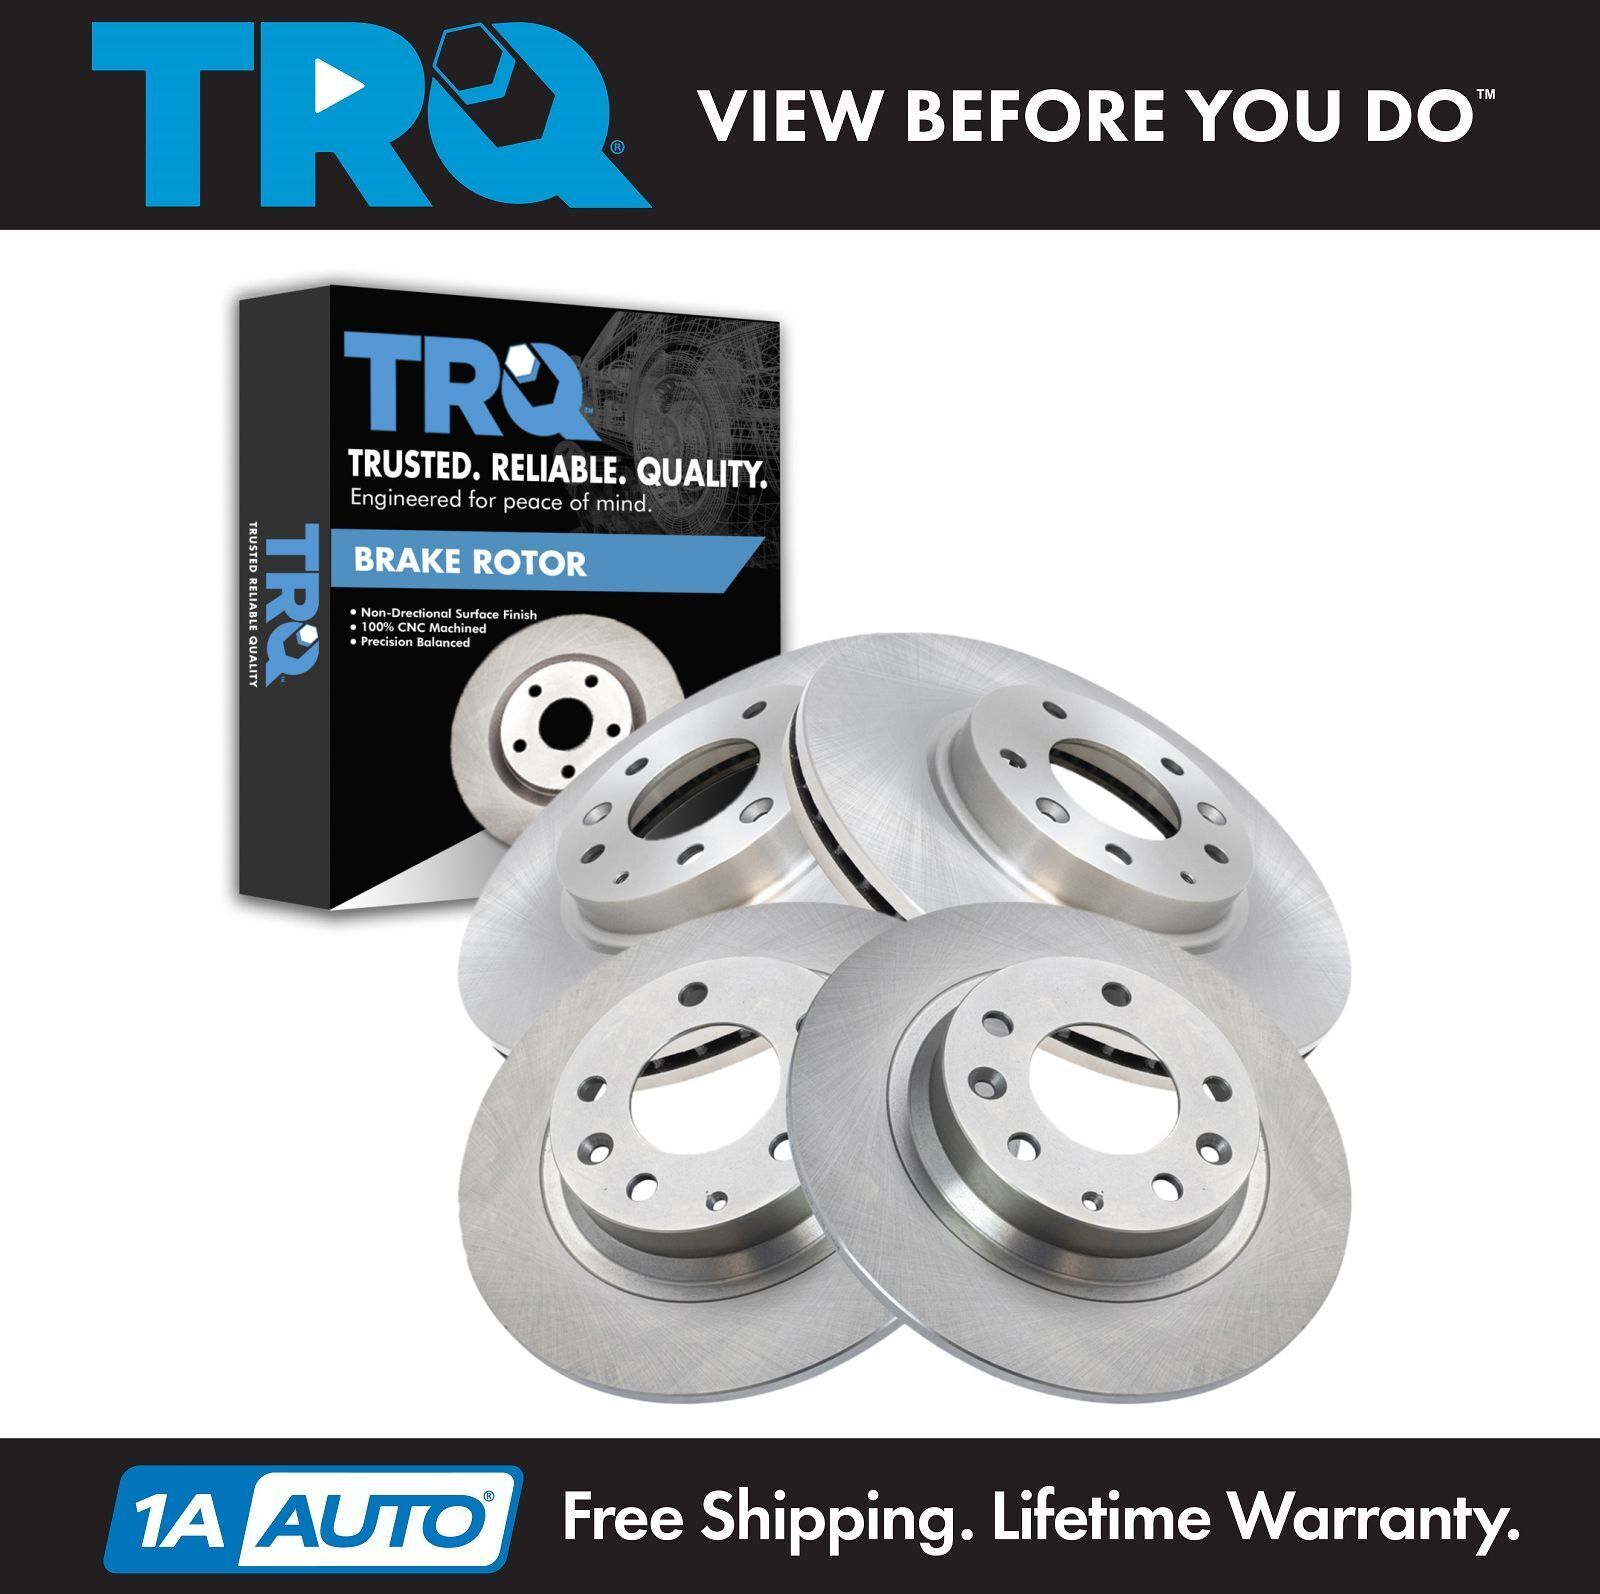 TRQ Brake Rotor Kit Front & Rear Set of 4 for Ford Mazda Lincoln Mercury